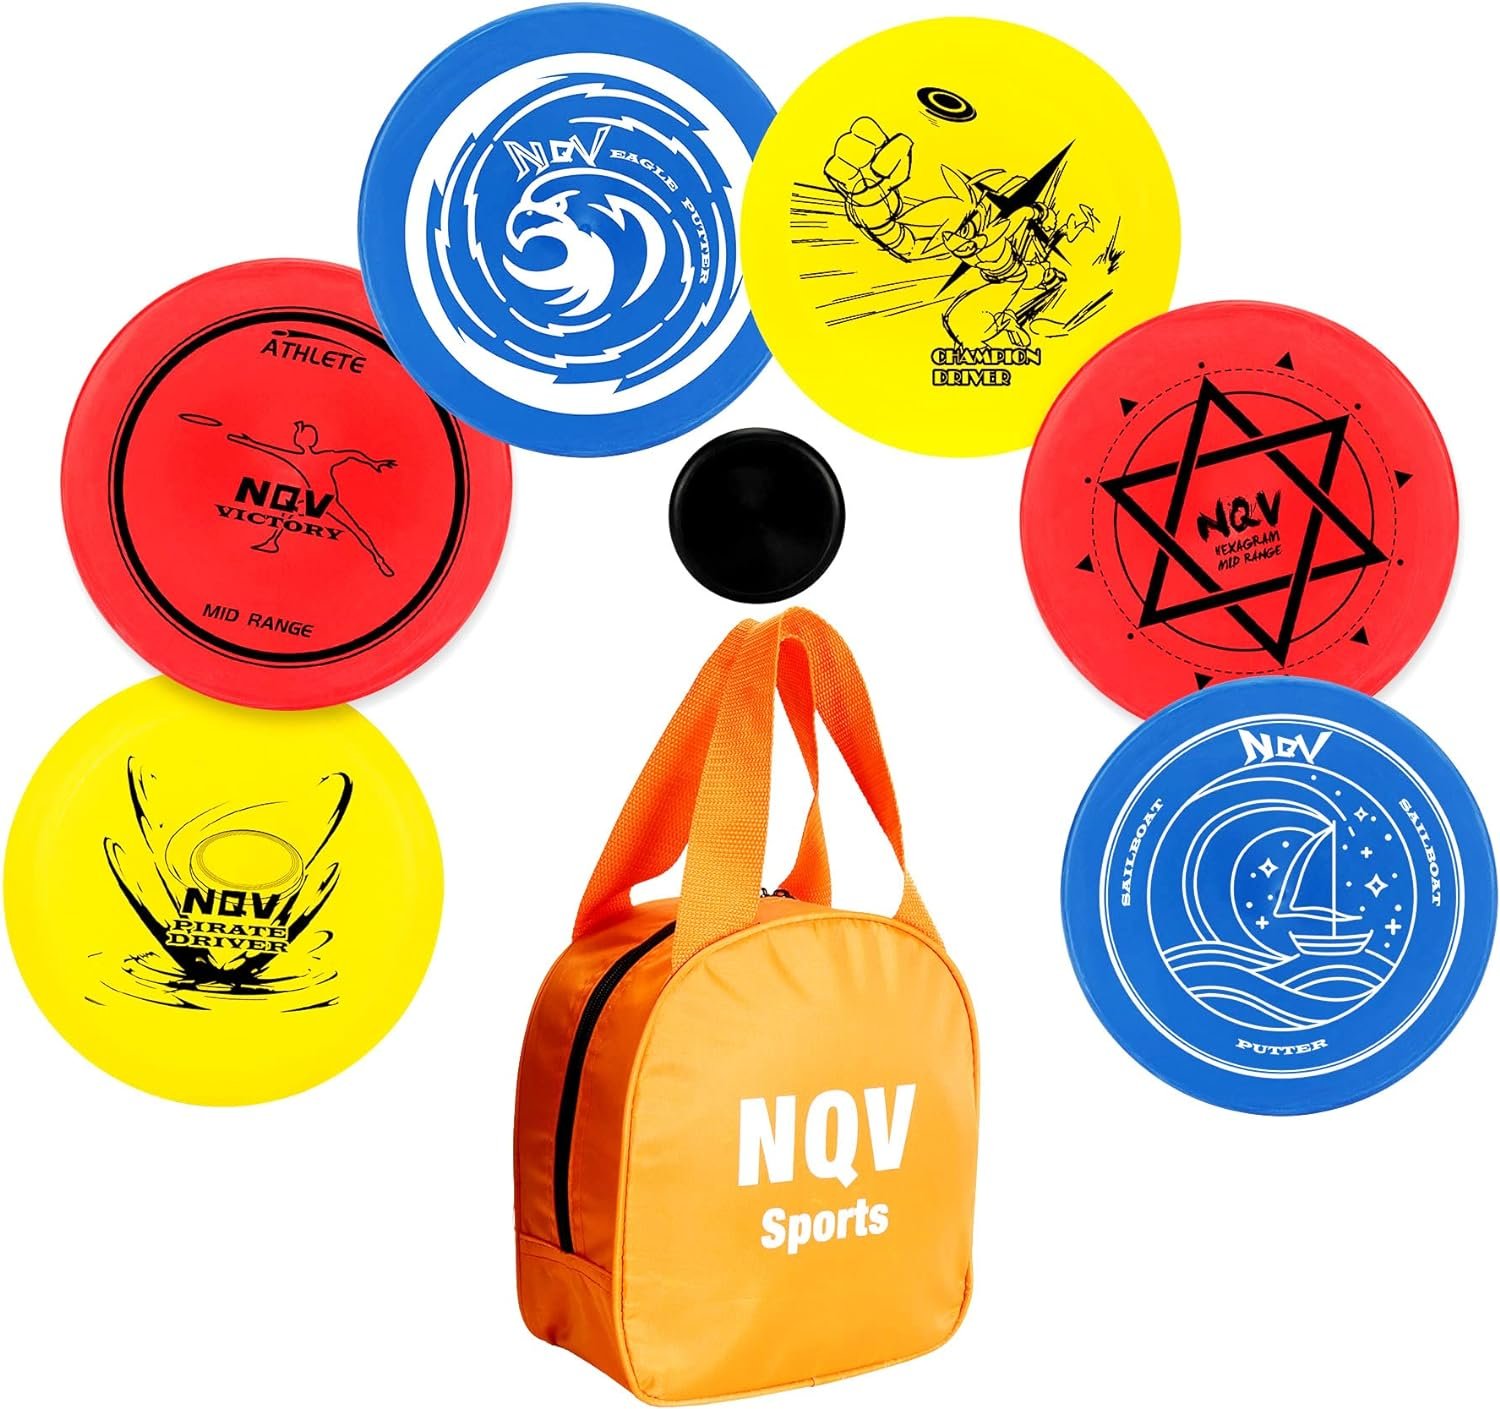 NQV Disc Golf Set with Bag,Disc Golf Beginner Set,6 PCS Flying Discs with Putters Drivers Mid Ranges+1 Disc Golf Bag for Beginners